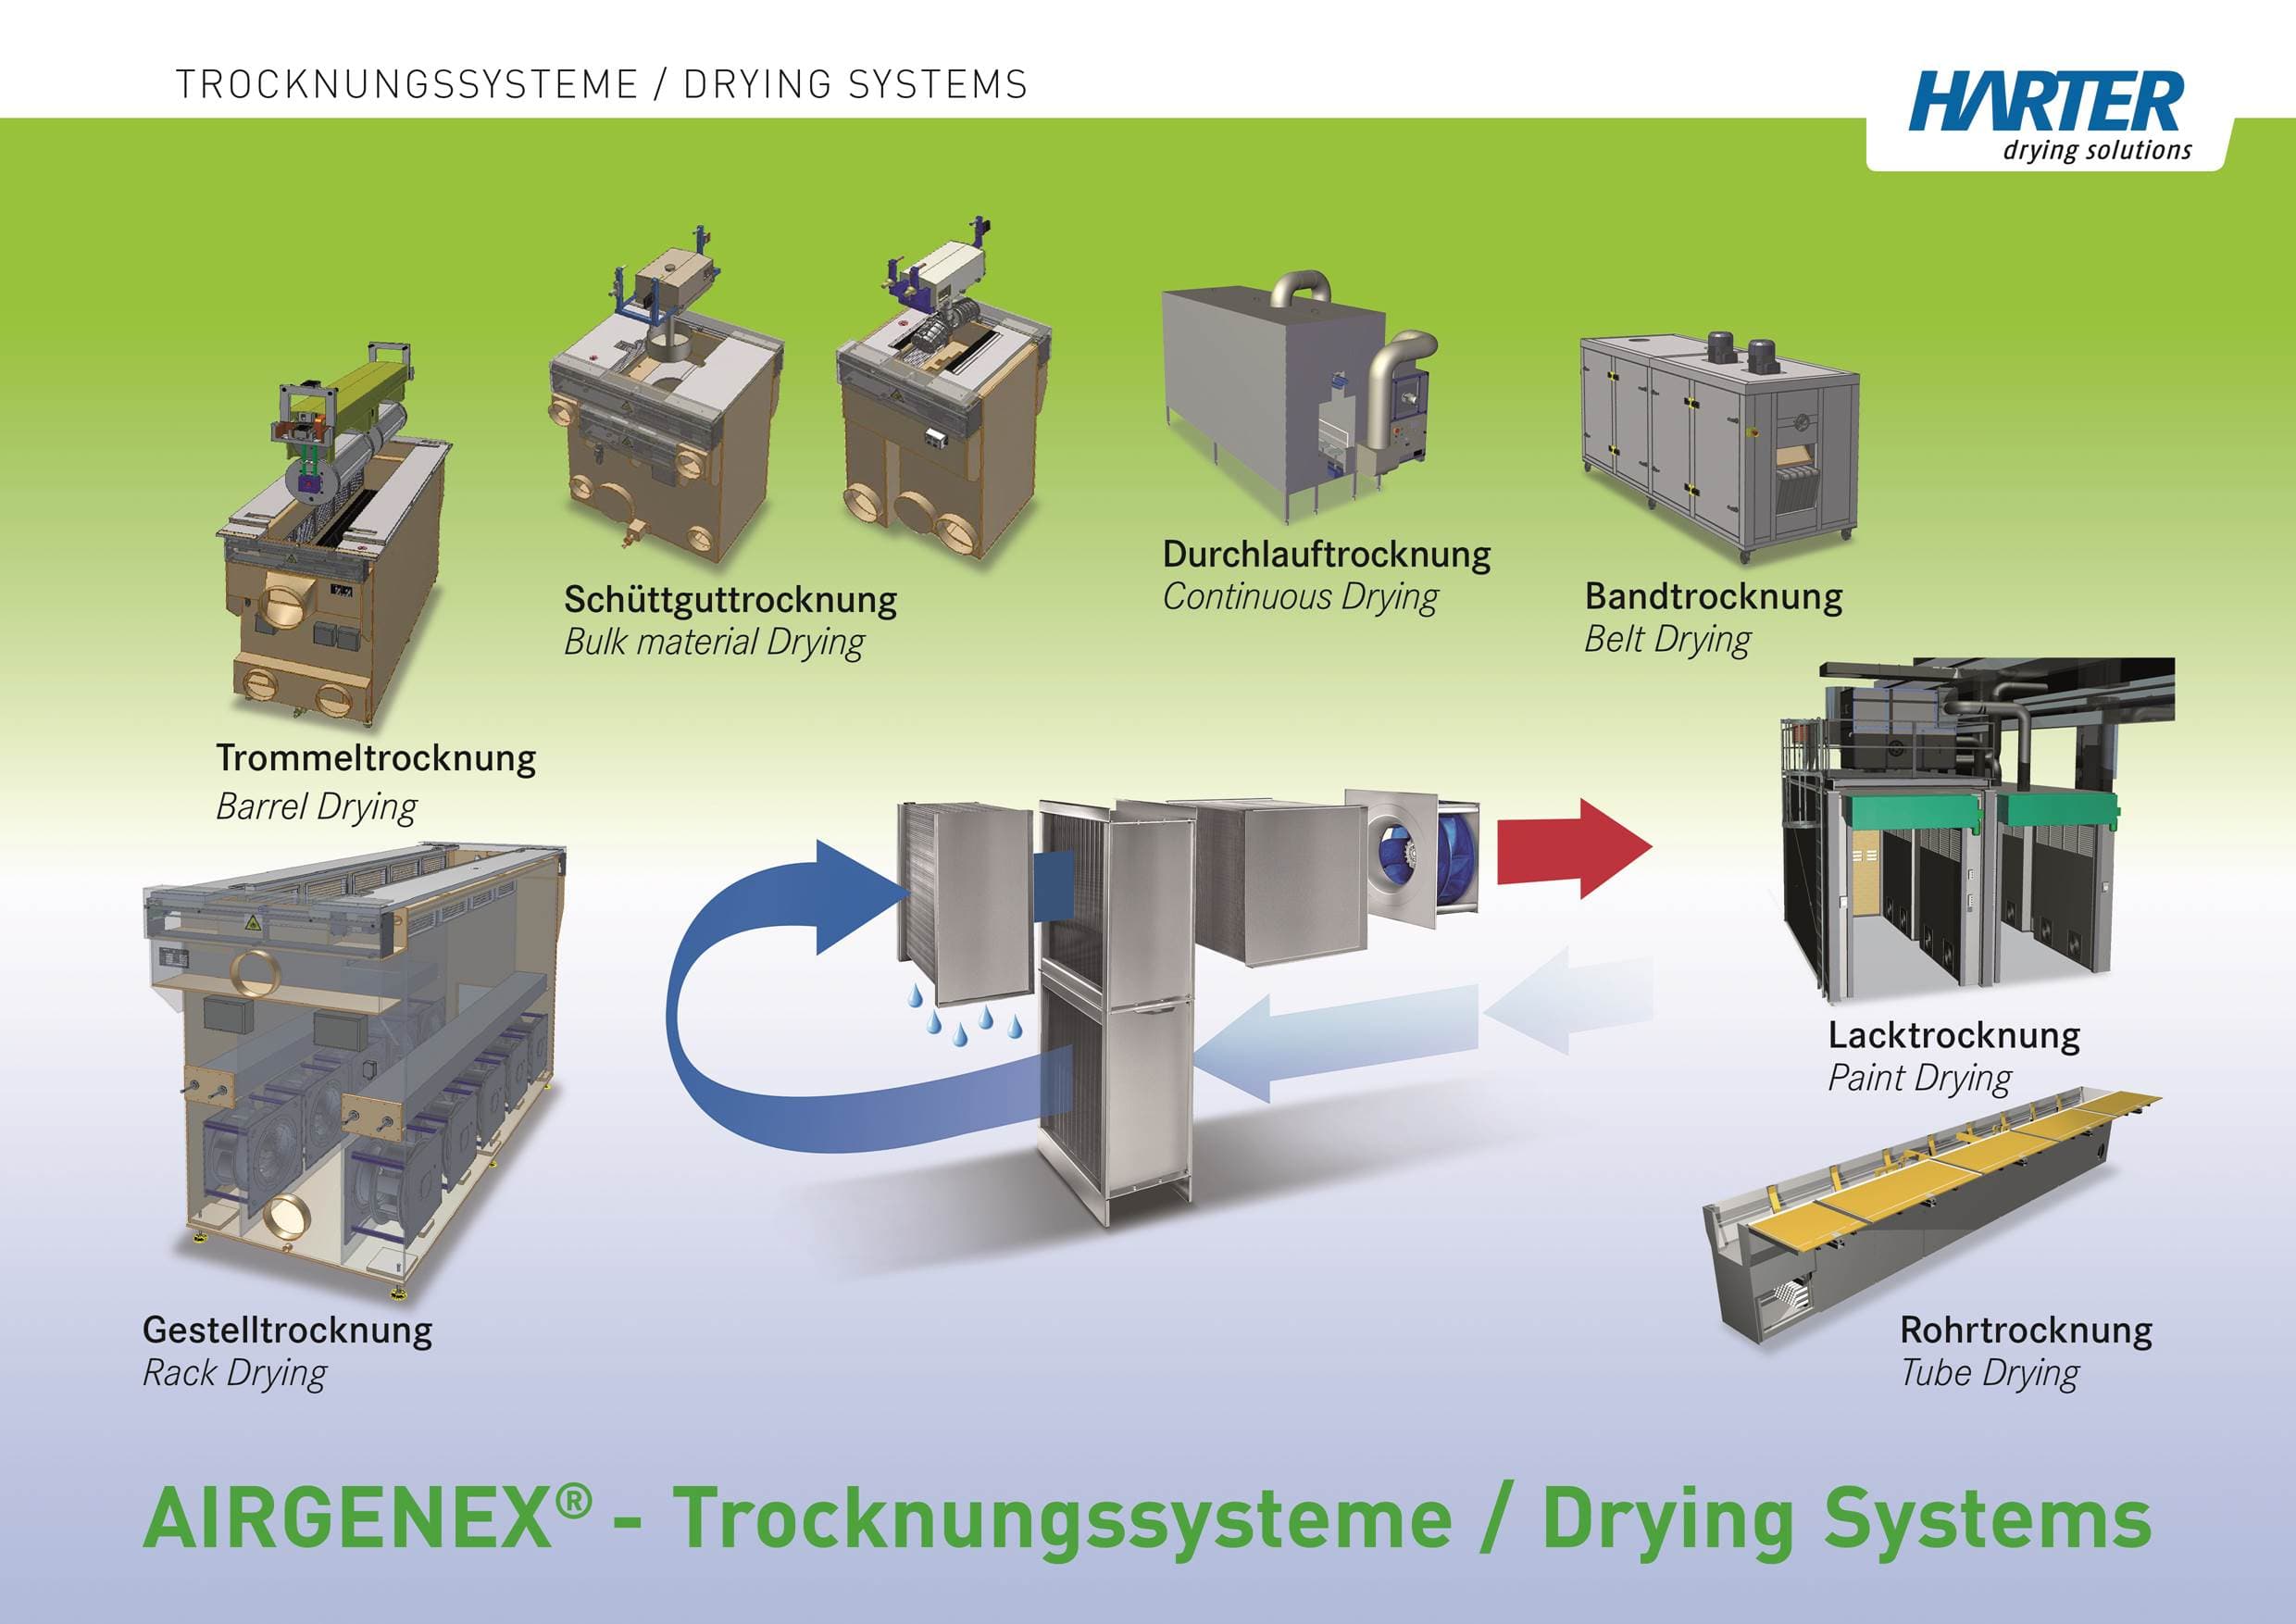 Energy-saving dryers with a heat pump for any process